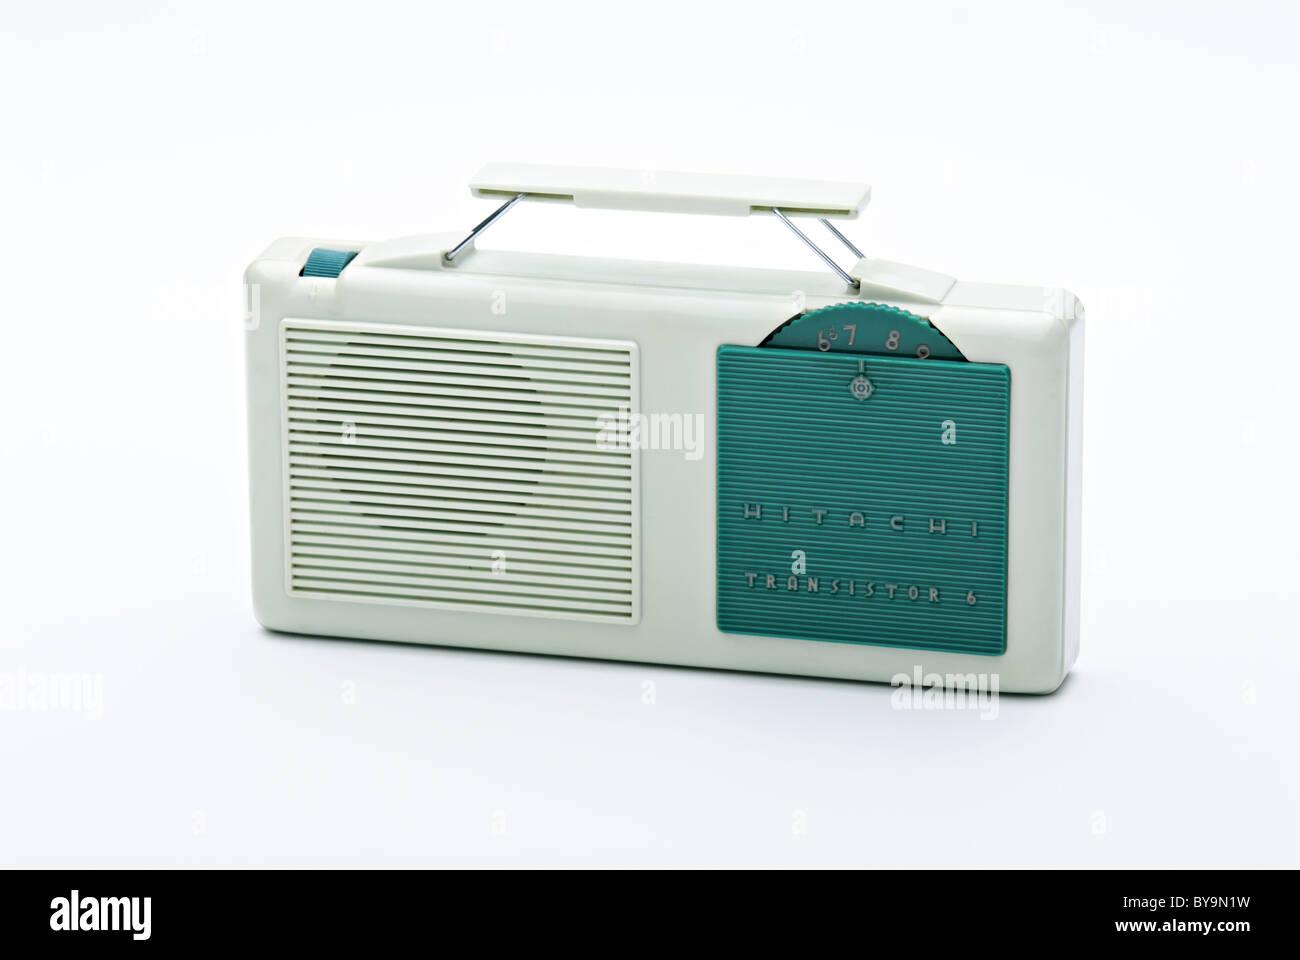 50 Old Radio High Resolution Stock Photography and Images - Alamy